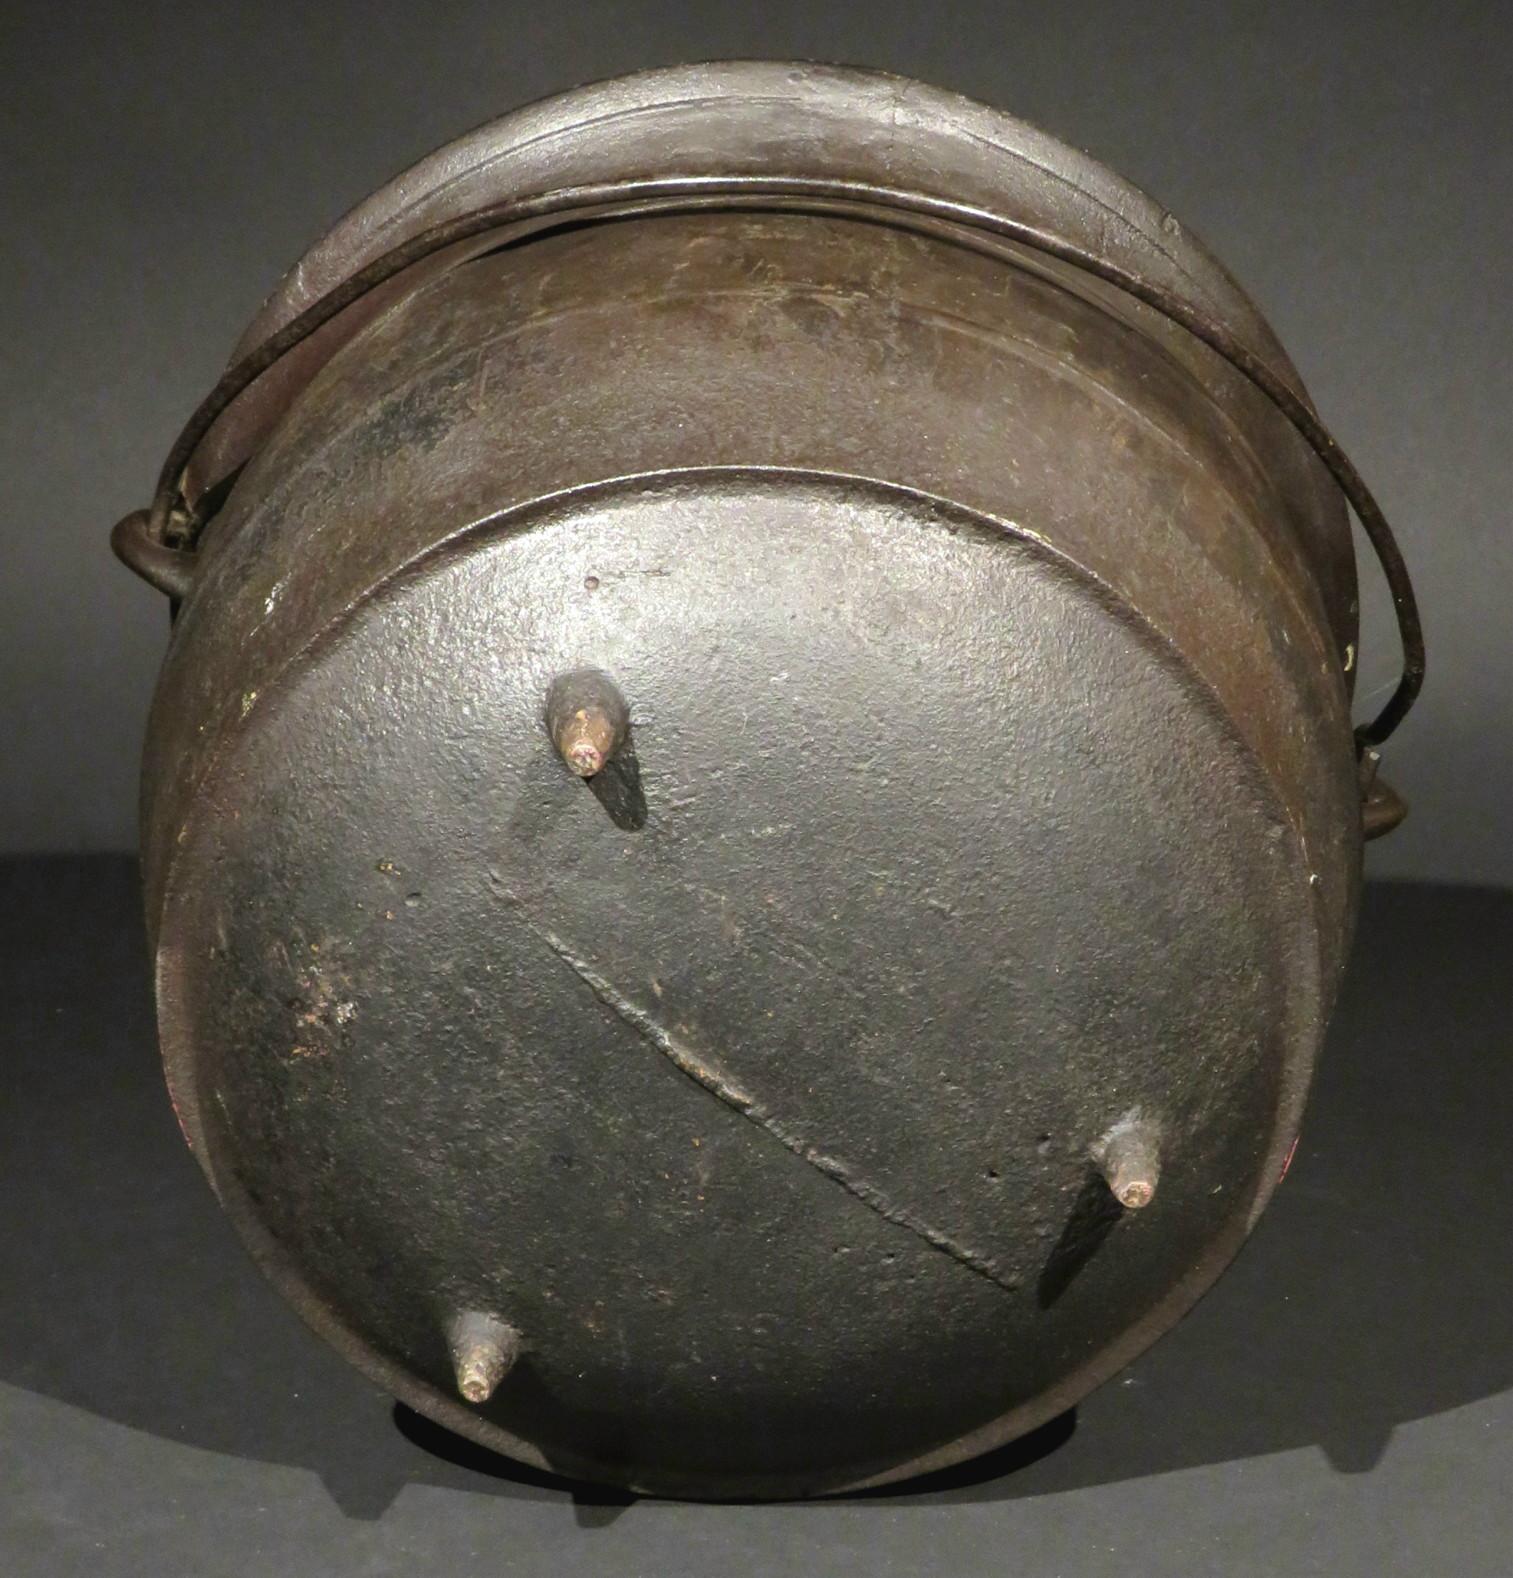 Rustic Early 19th Century Cast Iron Cauldron or Kettle, Continental Circa 1800